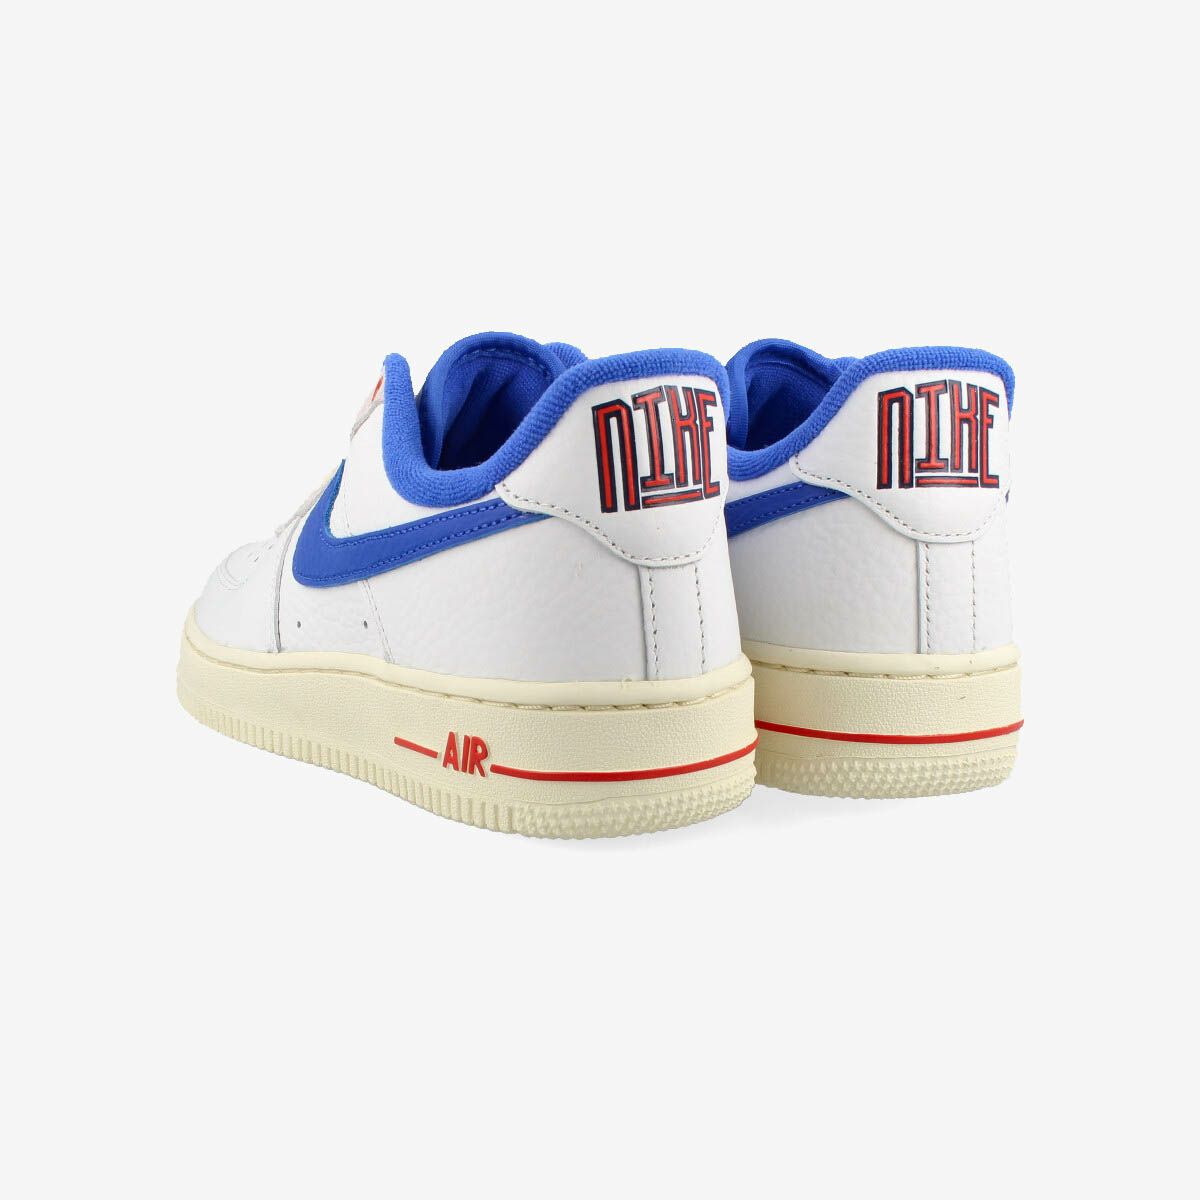 NIKE WMNS AIR FORCE 1 '07 LX SUMMIT WHITE/HYPER ROYAL/PICANTE RED 【COM